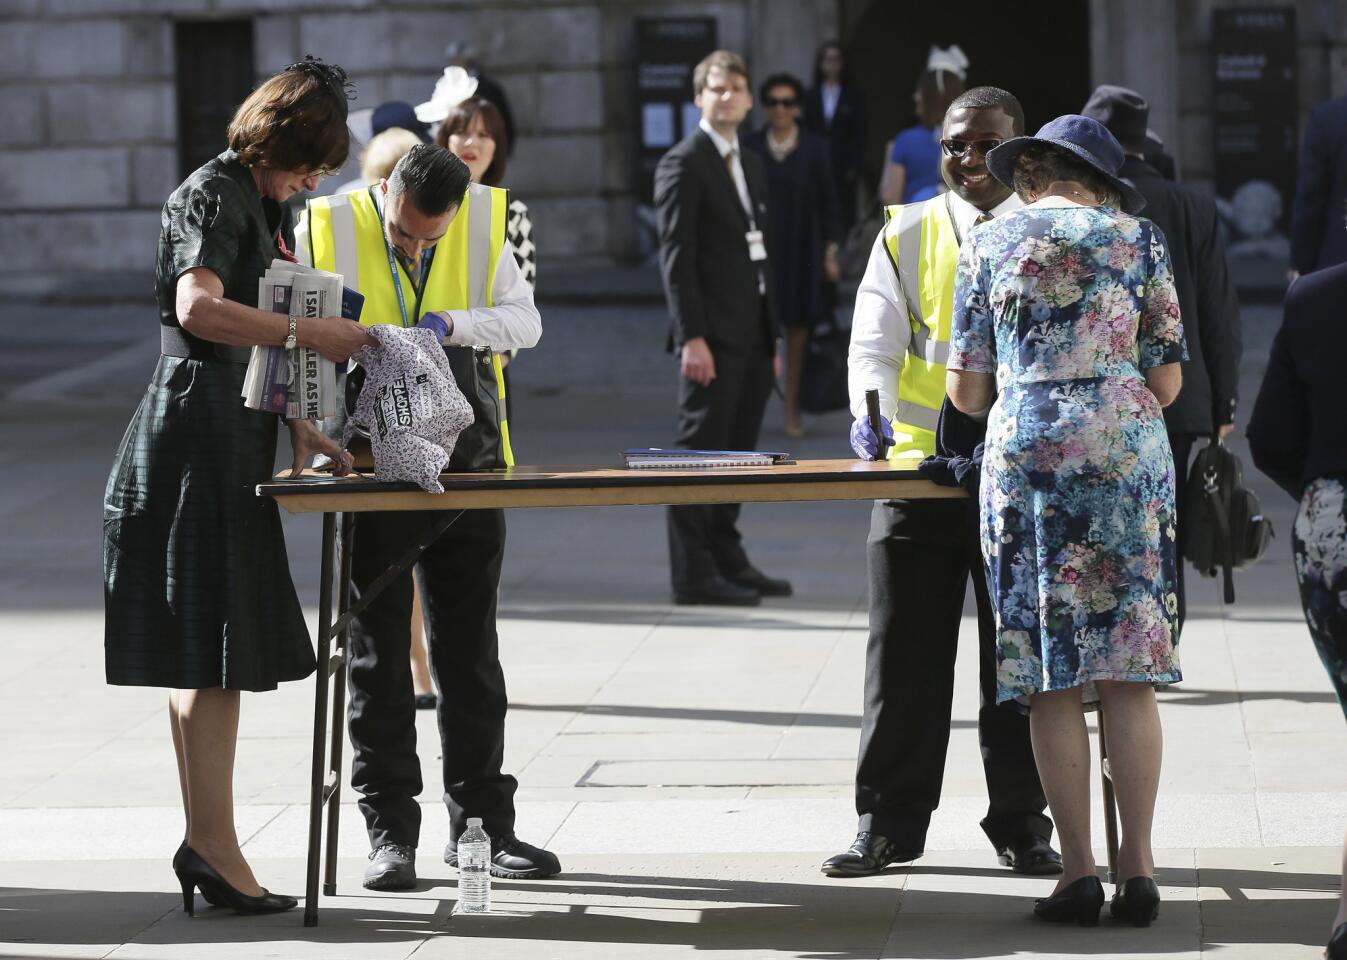 People have their bags searched outside St Paul's Cathedral in London on May 24, 2017, ahead of a service to mark the 100th anniversary of the Order of the British Empire. Amed troops were at vital locations after the official threat level was raised following a suicide bombing in Manchester that killed 22 people.